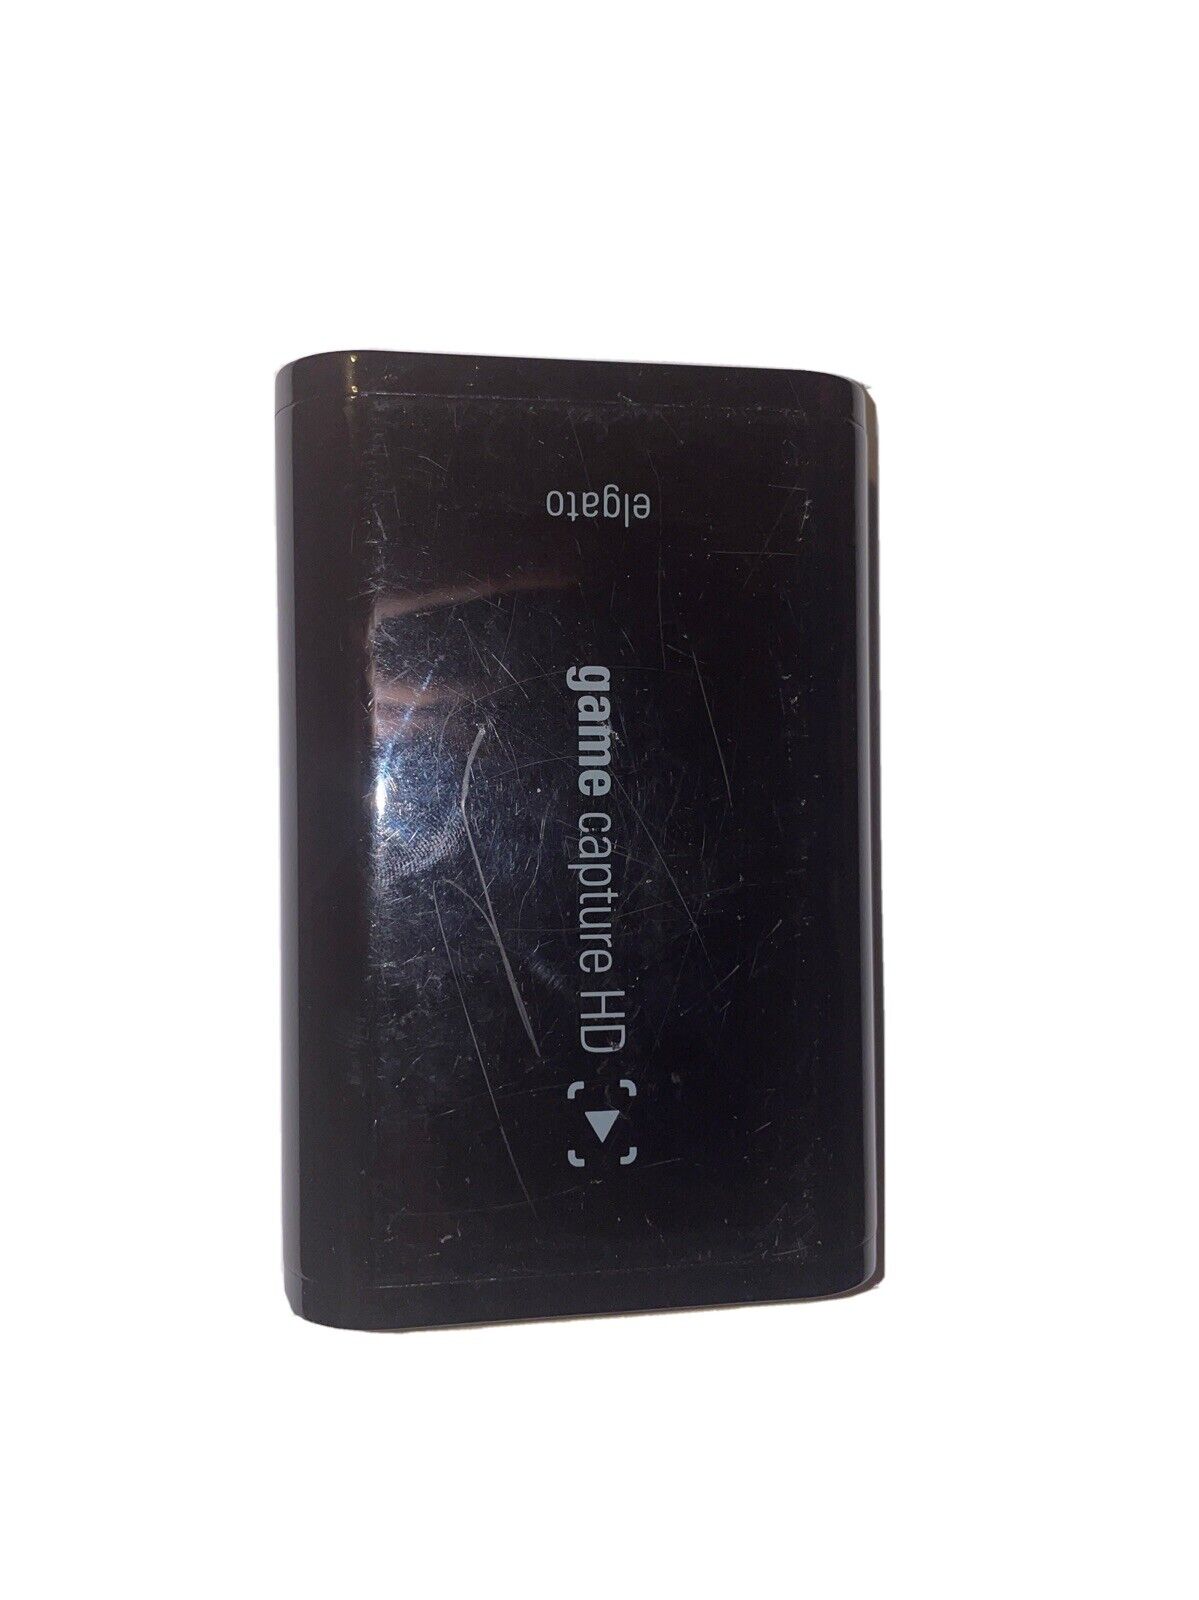 Elgato Game Capture HD High Definition Game Recorder - 10025010